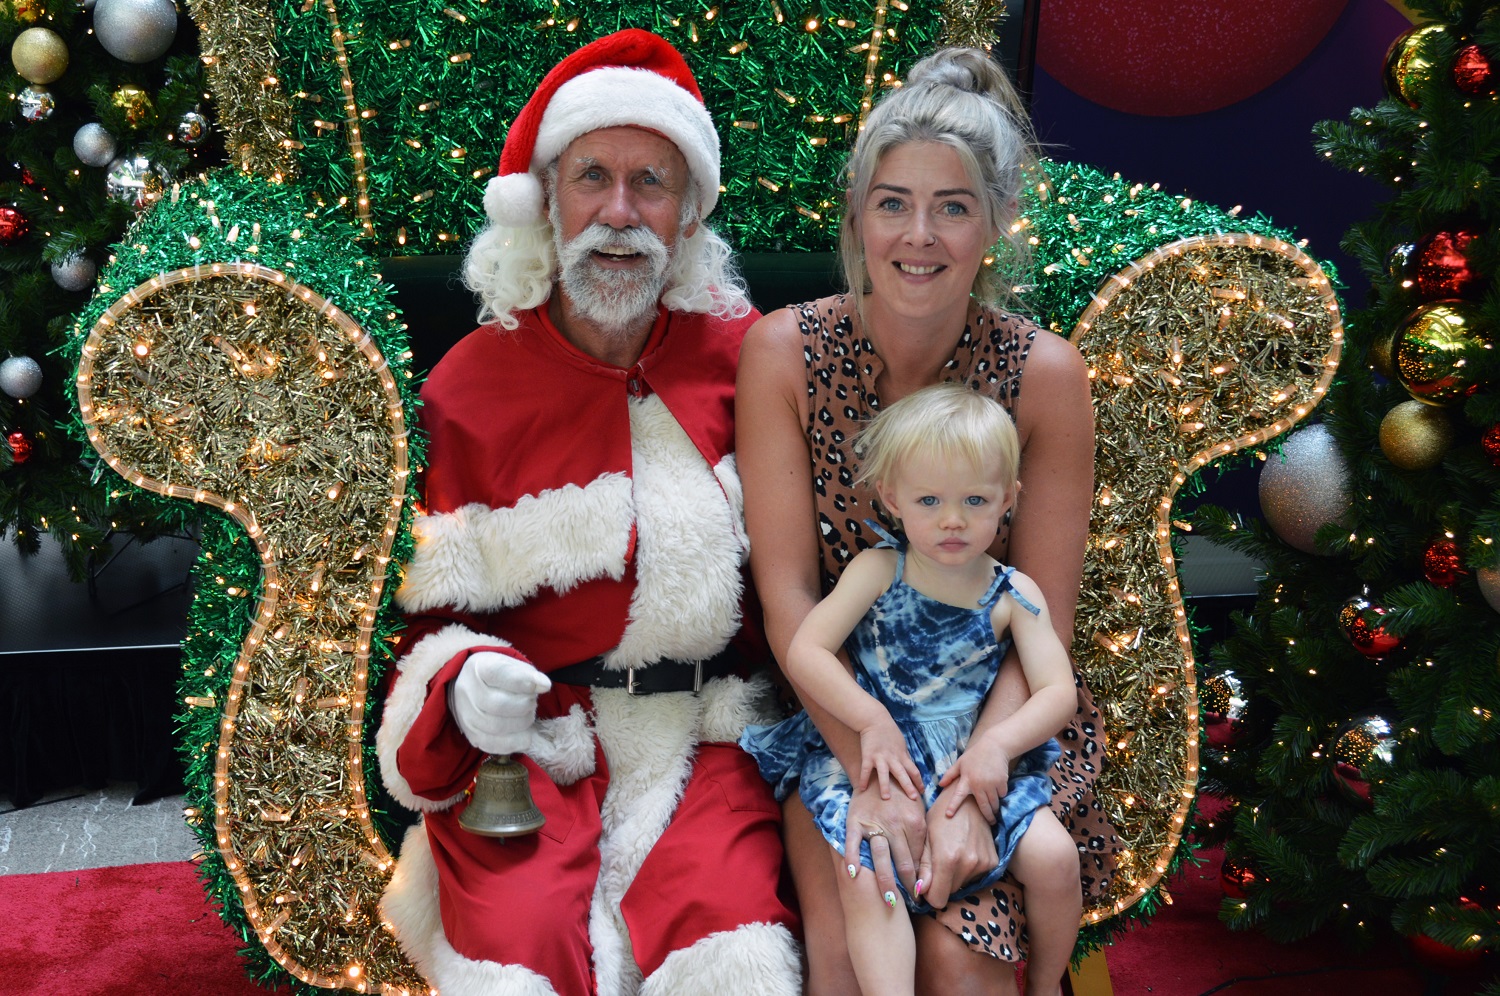 18-month old Maddi sitting on her mother's lap, next to Santa